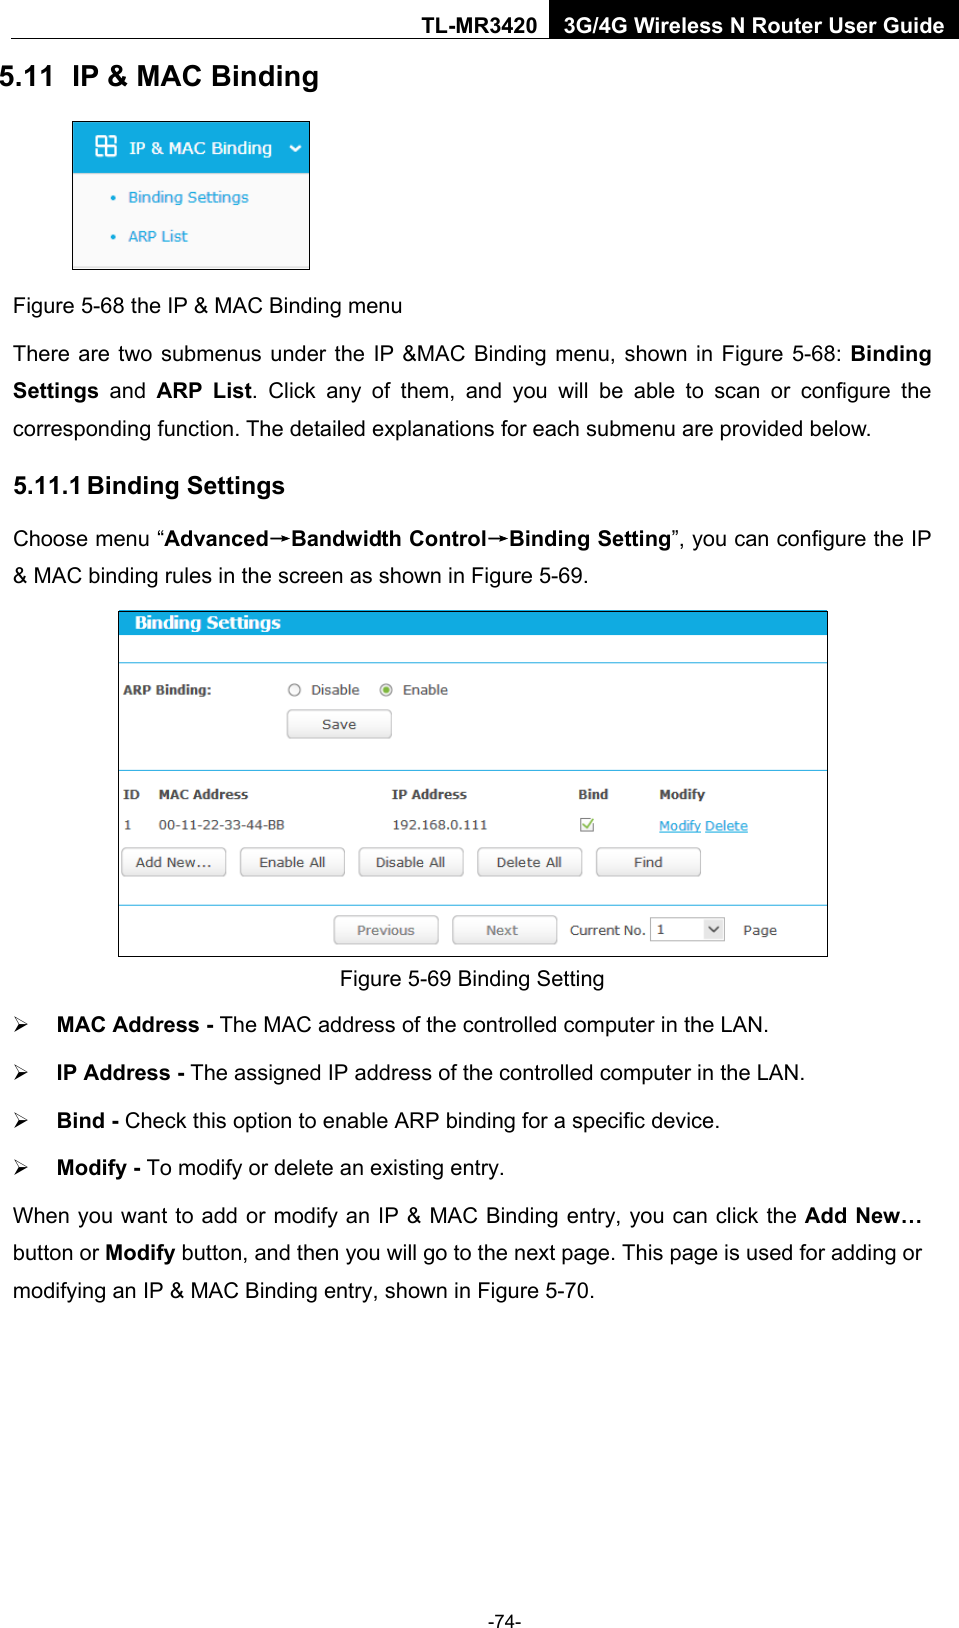    -74- TL-MR3420 3G/4G Wireless N Router User Guide 5.11 IP &amp; MAC Binding  Figure 5-68 the IP &amp; MAC Binding menu There are two submenus under the IP &amp;MAC Binding menu, shown in Figure 5-68: Binding Settings  and ARP List. Click any of them, and you will be able to scan or configure the corresponding function. The detailed explanations for each submenu are provided below. 5.11.1 Binding Settings Choose menu “Advanced→Bandwidth Control→Binding Setting”, you can configure the IP &amp; MAC binding rules in the screen as shown in Figure 5-69.    Figure 5-69 Binding Setting  MAC Address - The MAC address of the controlled computer in the LAN.    IP Address - The assigned IP address of the controlled computer in the LAN.    Bind - Check this option to enable ARP binding for a specific device.    Modify - To modify or delete an existing entry.   When you want to add or modify an IP &amp; MAC Binding entry, you can click the Add New… button or Modify button, and then you will go to the next page. This page is used for adding or modifying an IP &amp; MAC Binding entry, shown in Figure 5-70.   